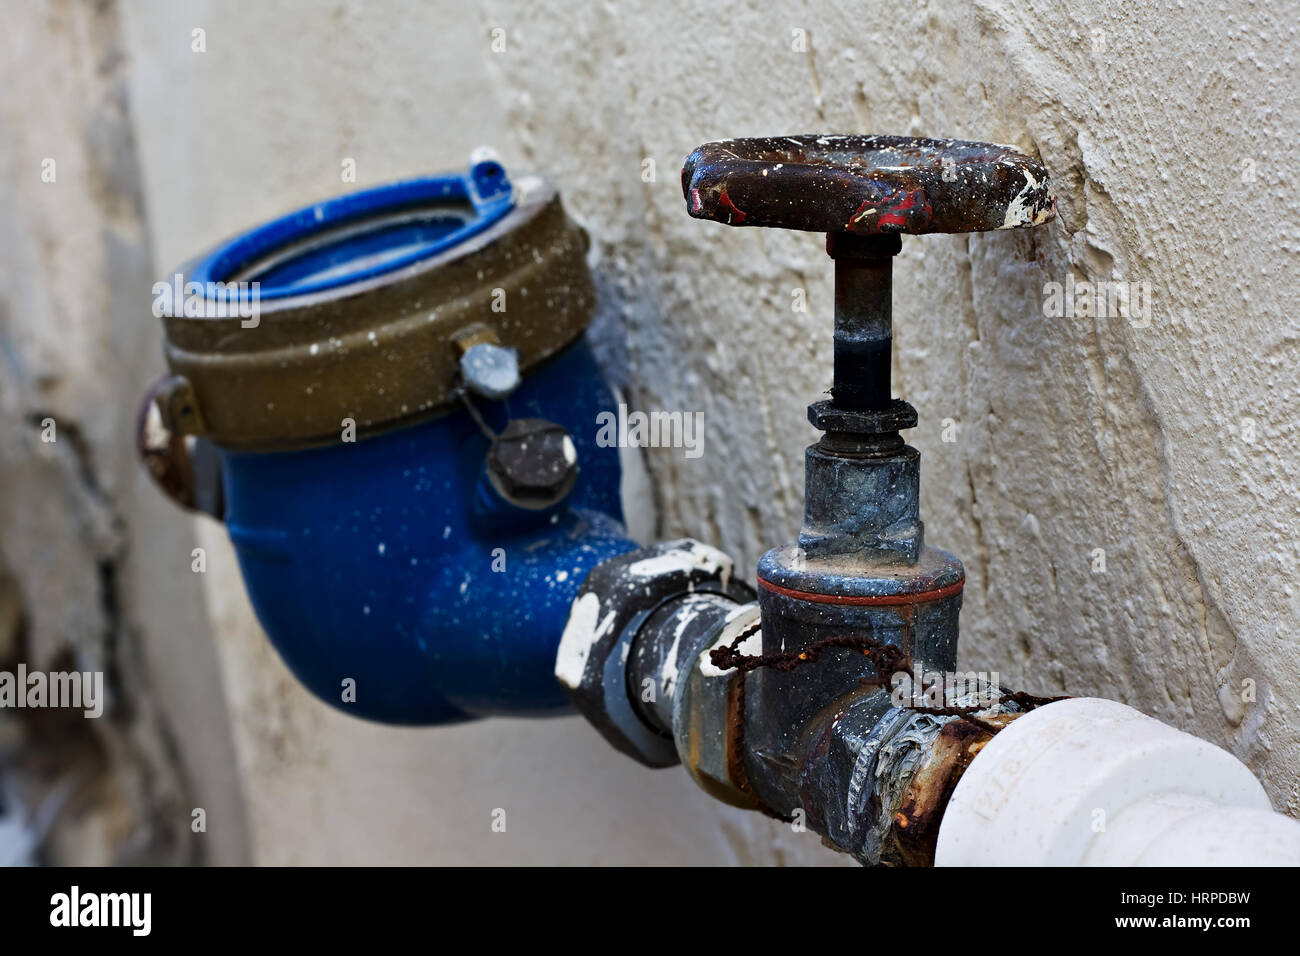 Rusty old stop cock valve and water meter Stock Photo - Alamy